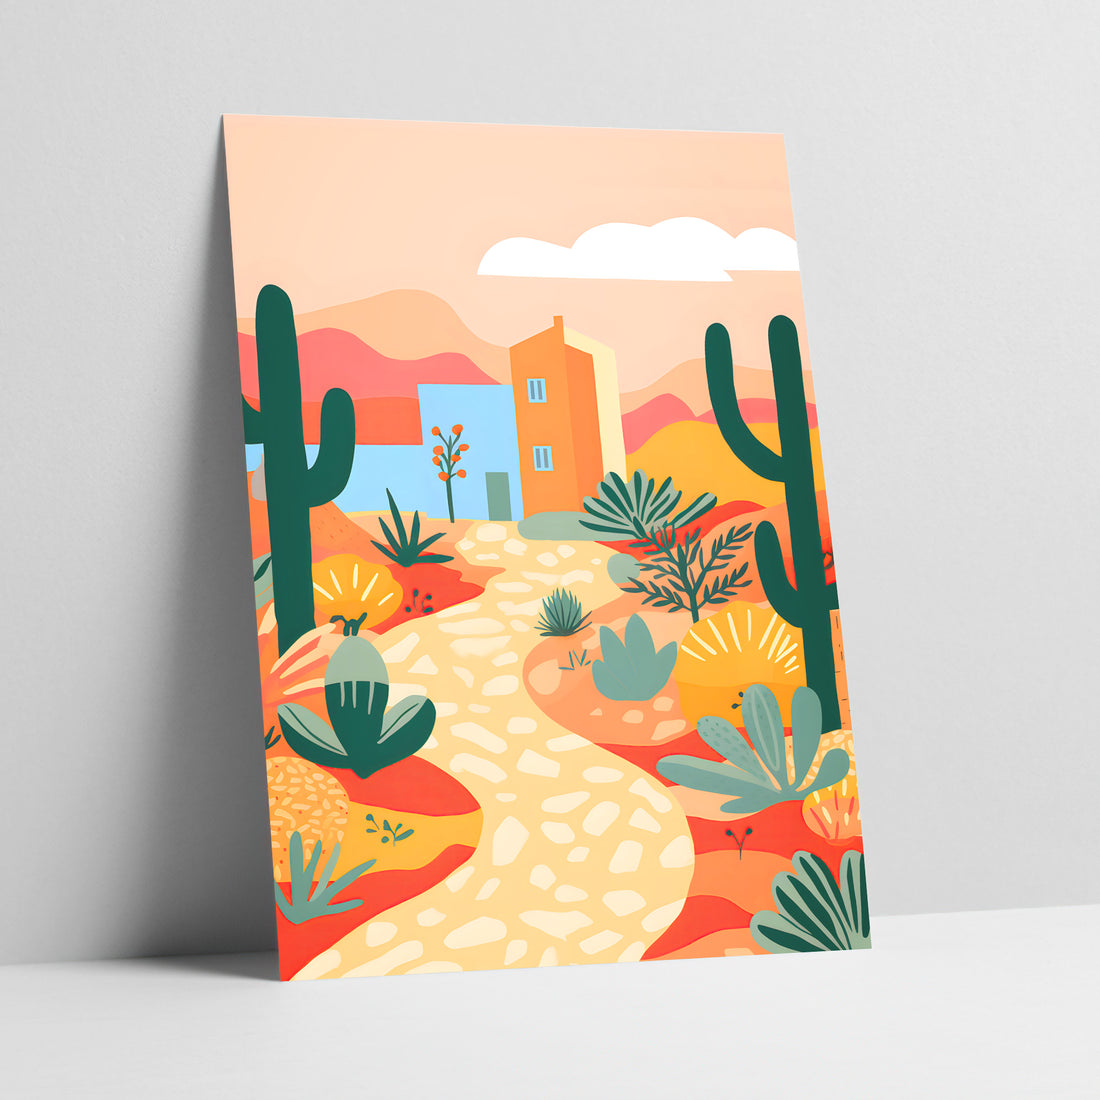 Art print of desert landscape illustration with cacti and house